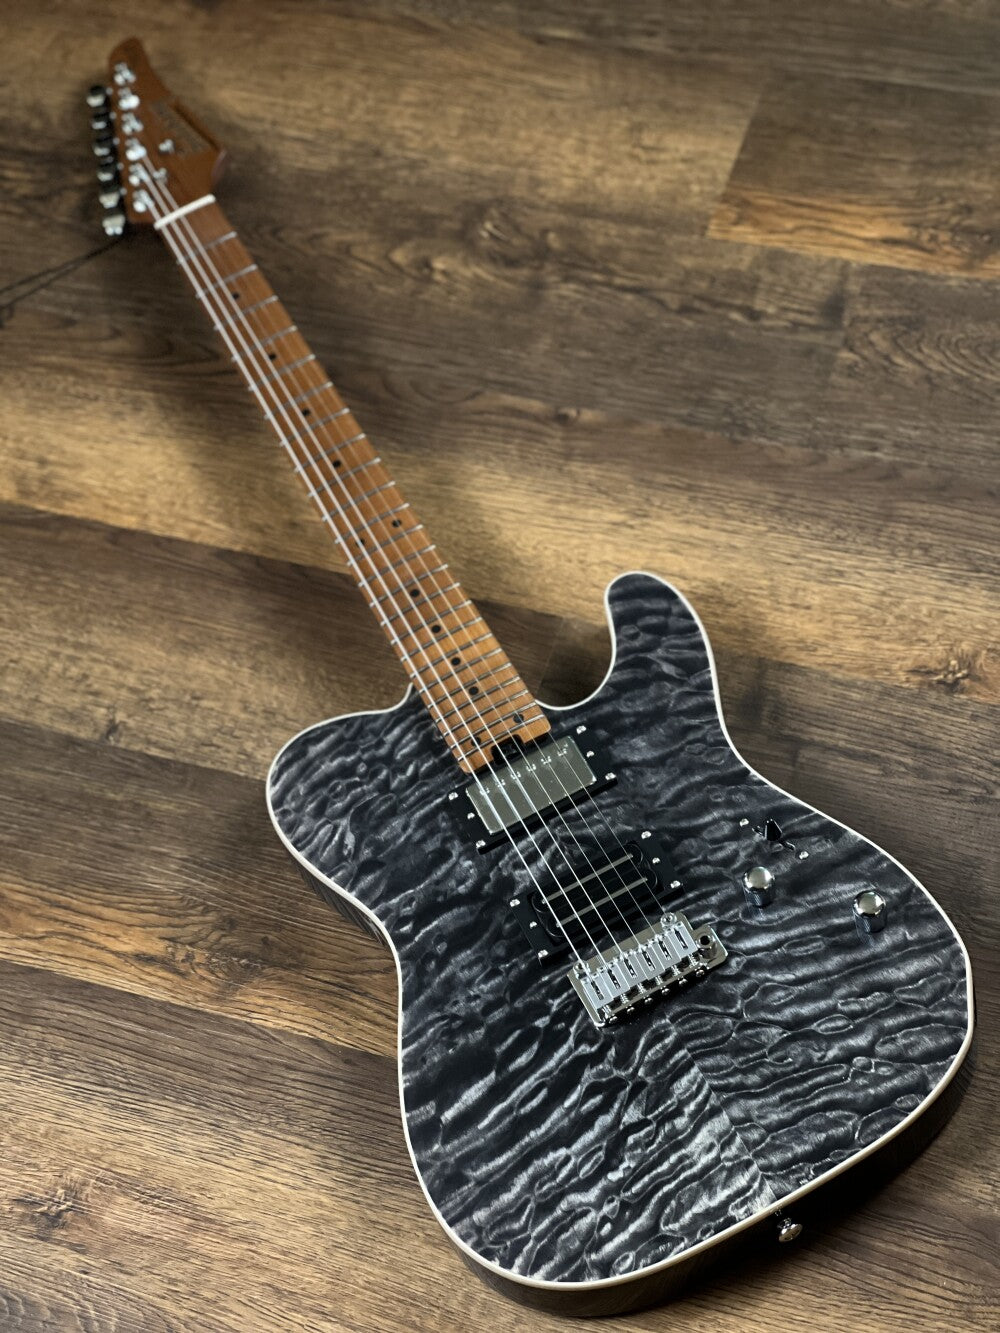 Soloking MT-1 Custom 24 Quilt in Seethru Black with Roasted Maple neck and FB 電結他/吉他